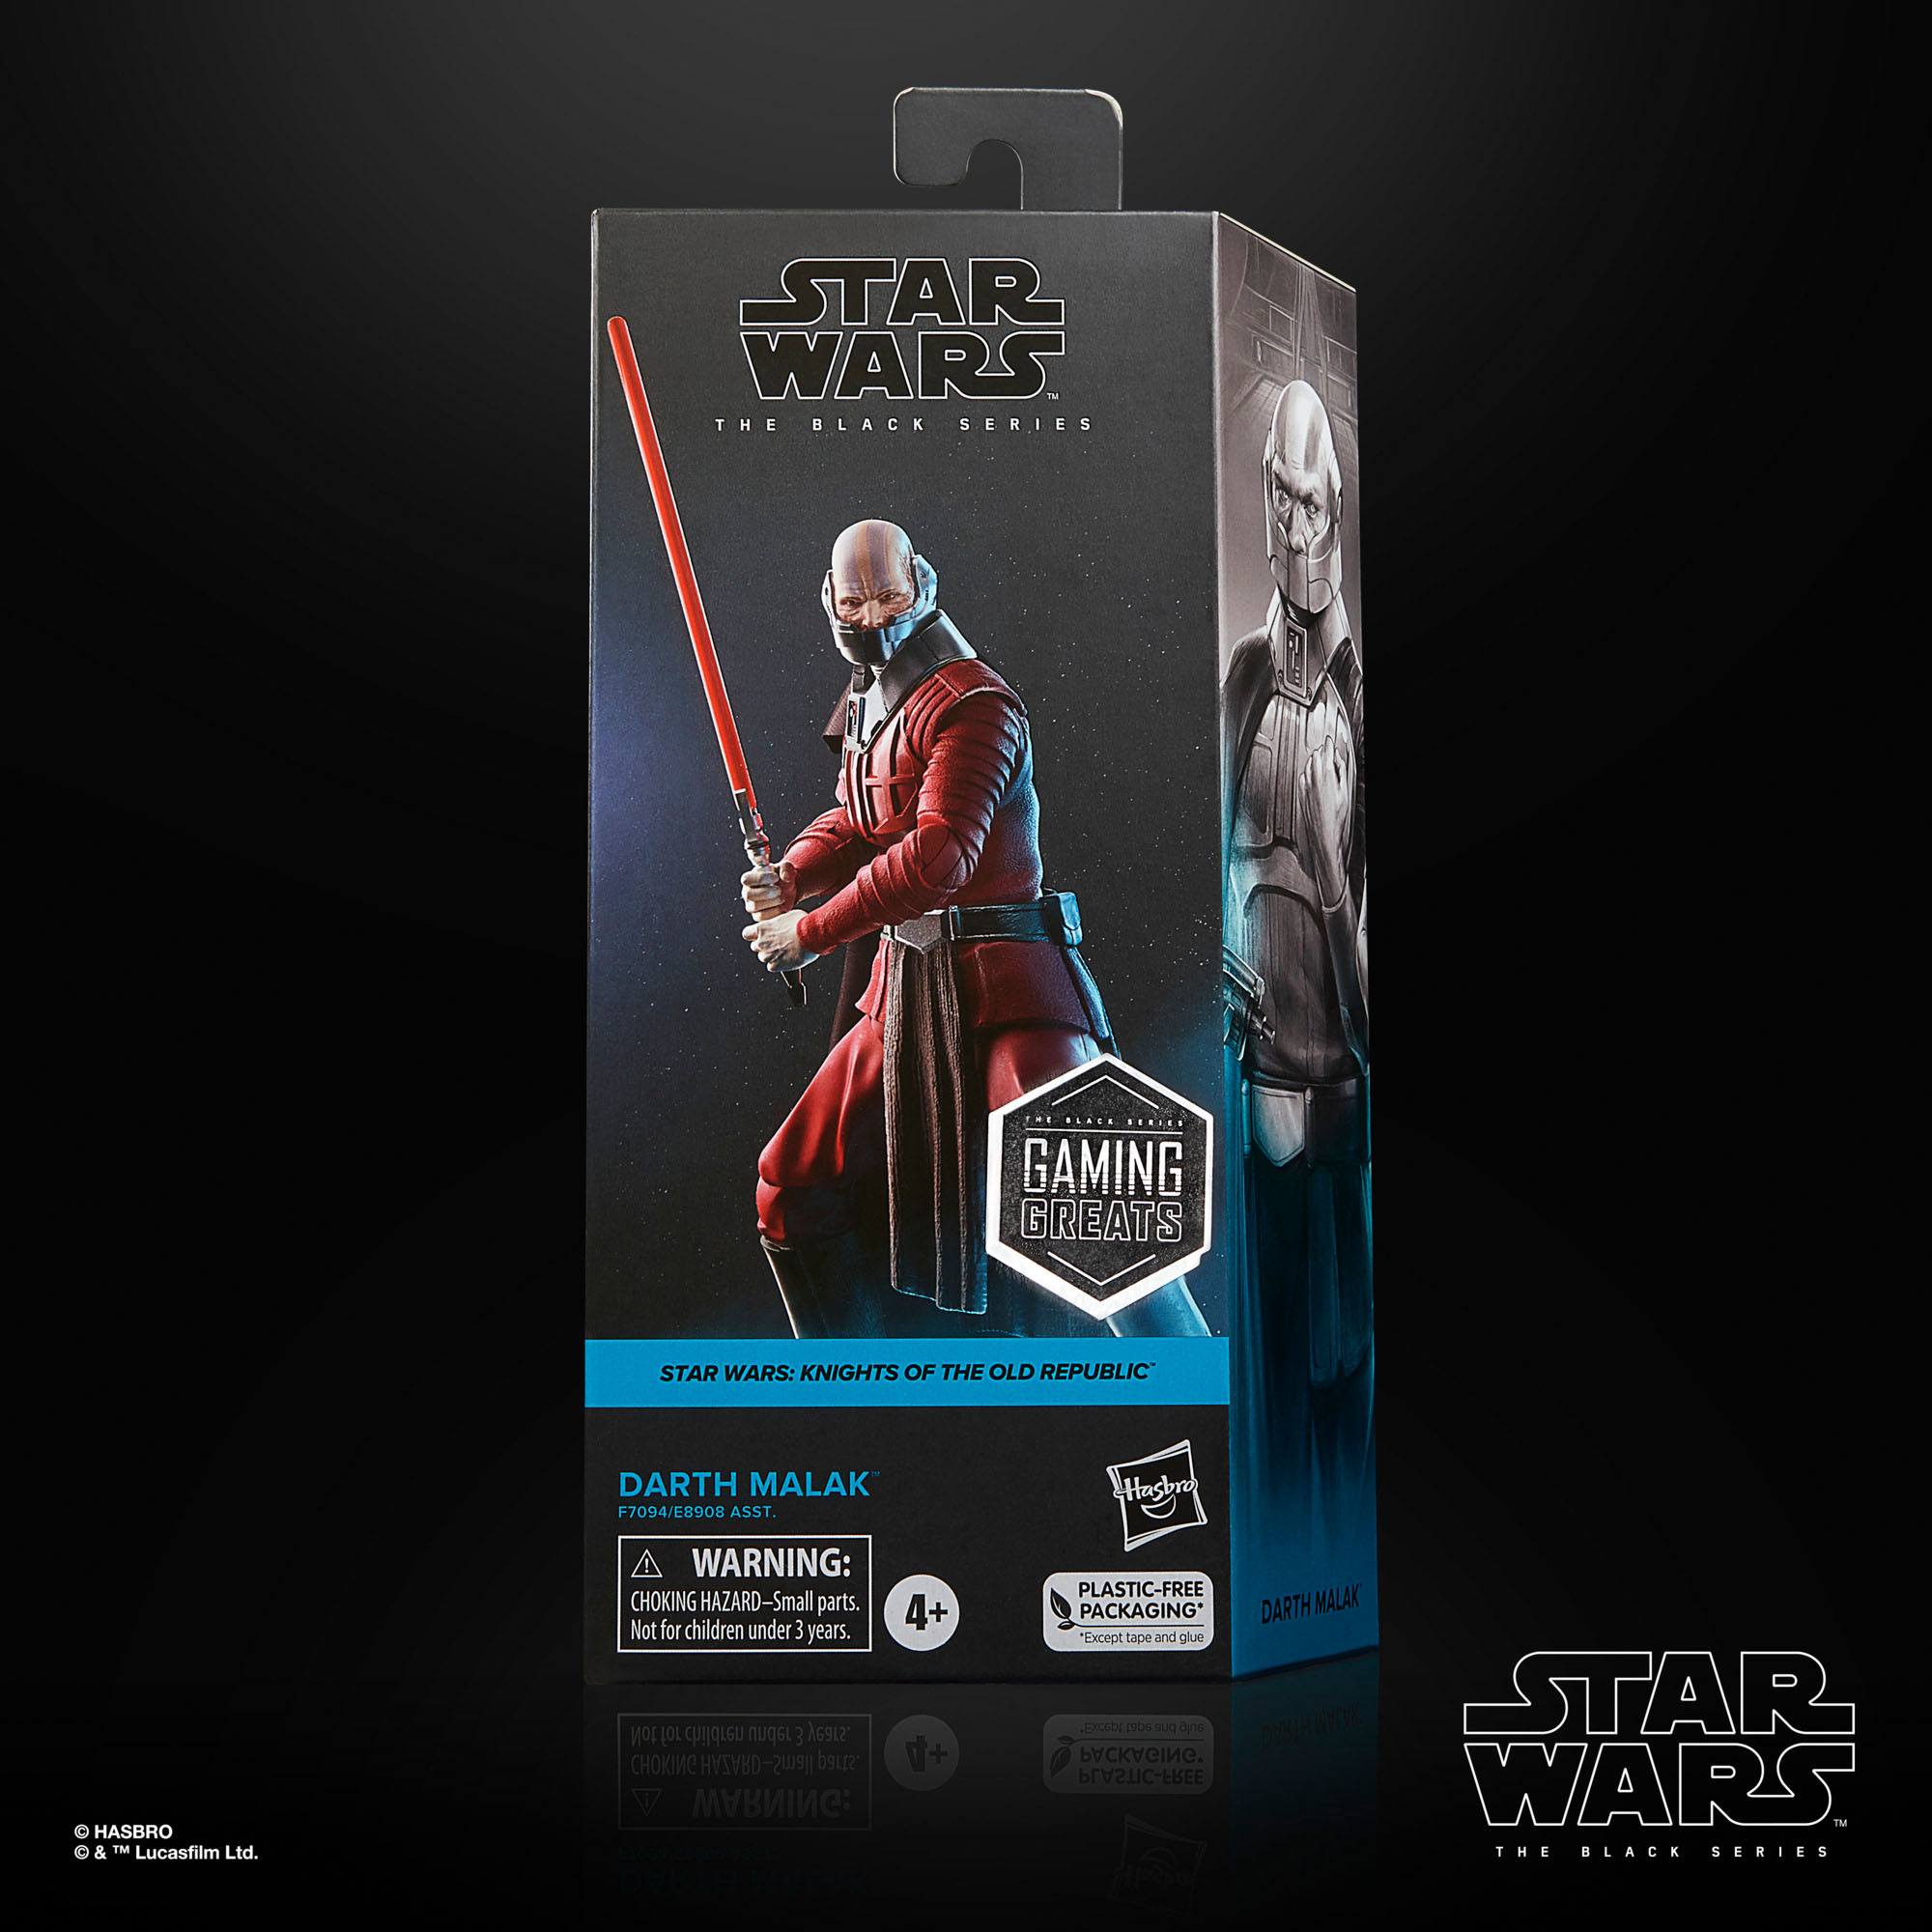 Star Wars: Knights of the Old Republic Black Series Gaming Greats Actionfigur Darth Malak 15 cm F70945L00 5010996124791